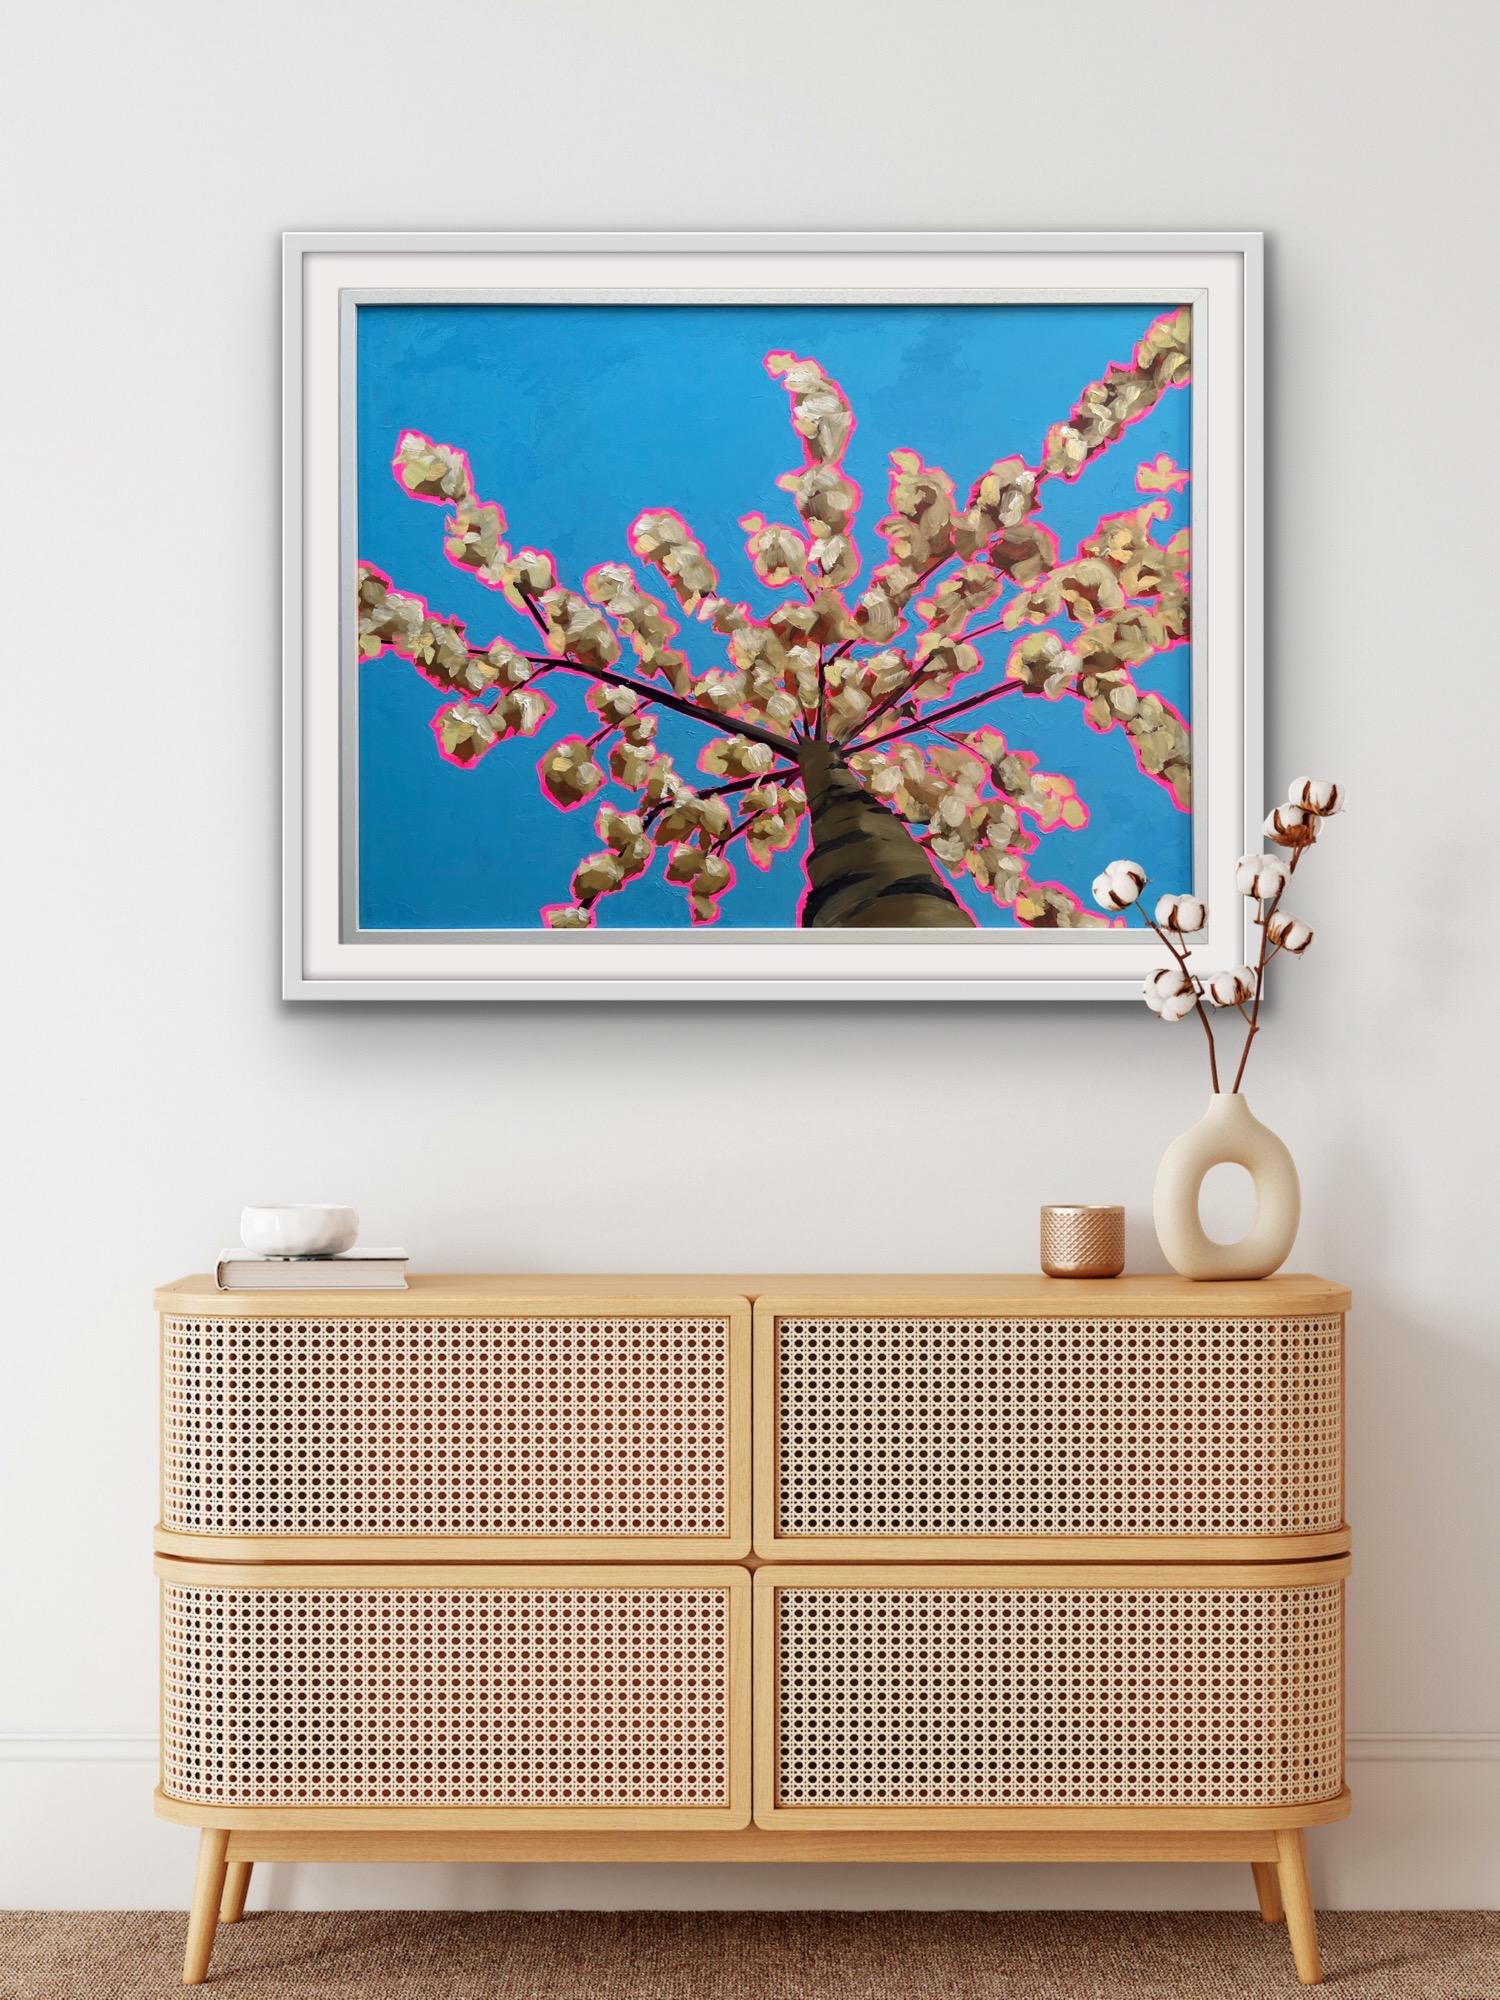 Looking Up Through White Blossom to Calm, Tree Painting, Landscape Pop Art - Brown Landscape Painting by Emily Finch